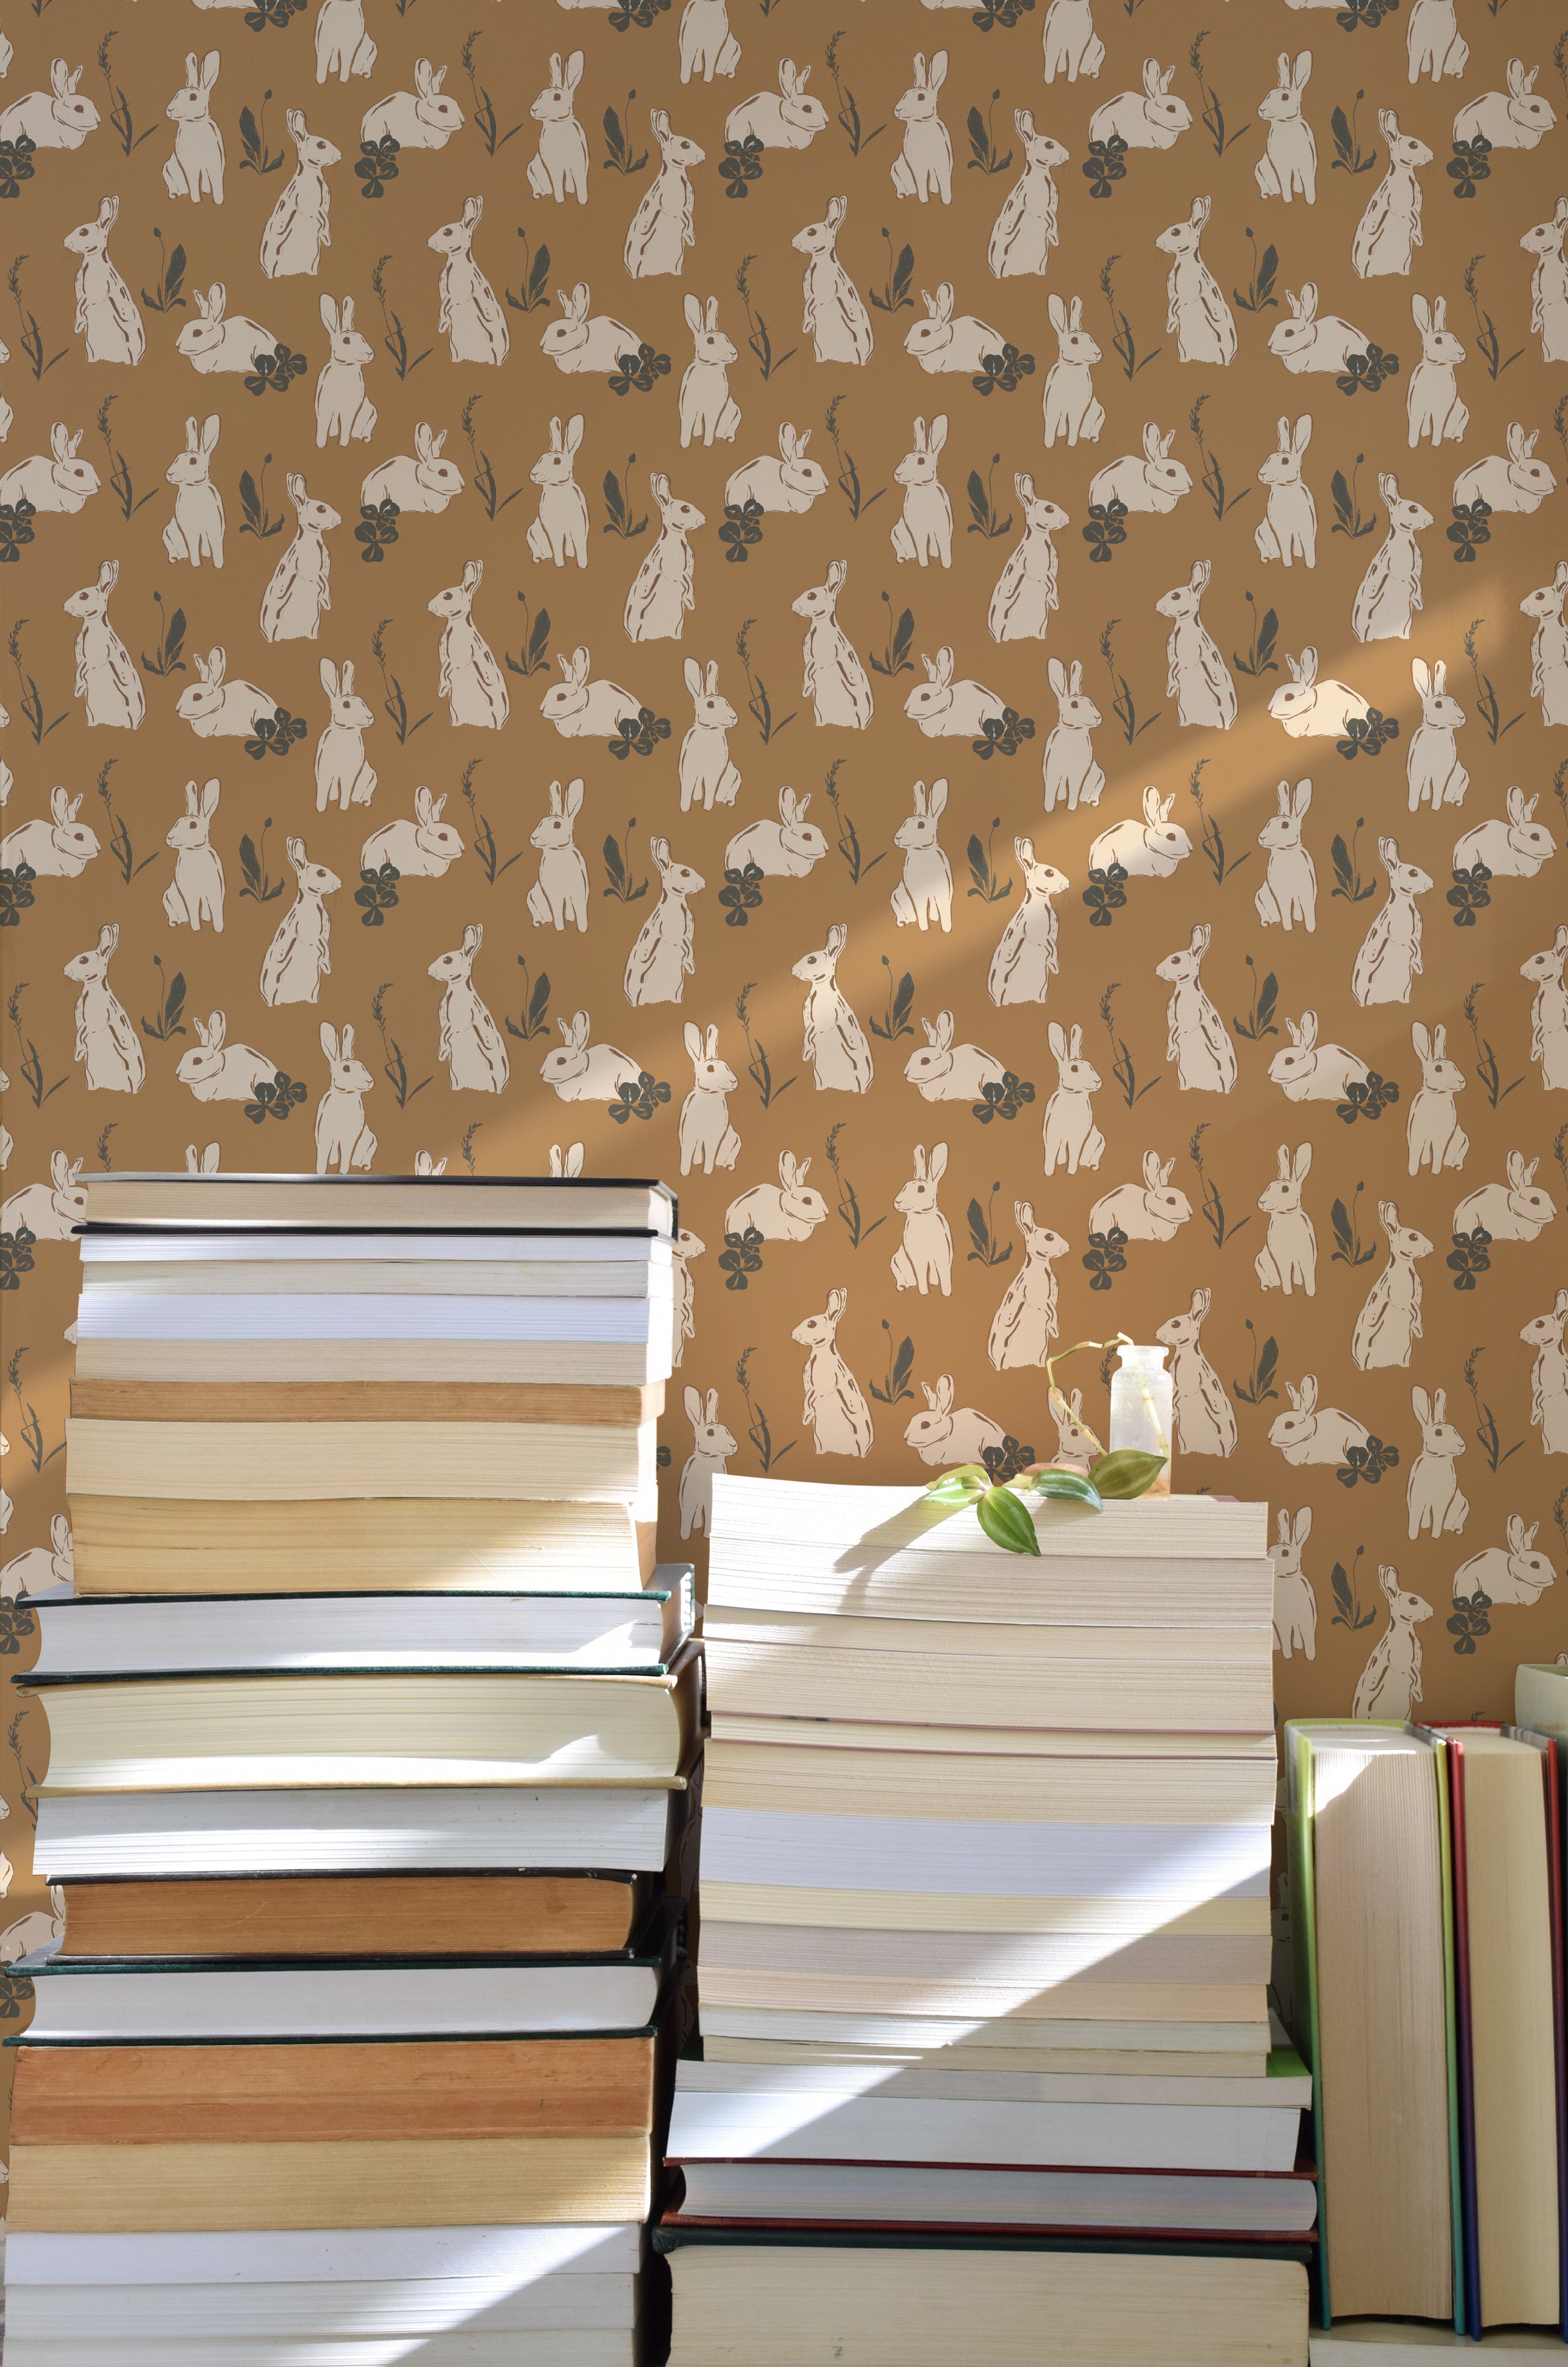 A close-up of charming rabbit-patterned wallpaper, with sketched rabbits and flora in beige and cream, complemented by the warm glow of sunlight across a stack of books